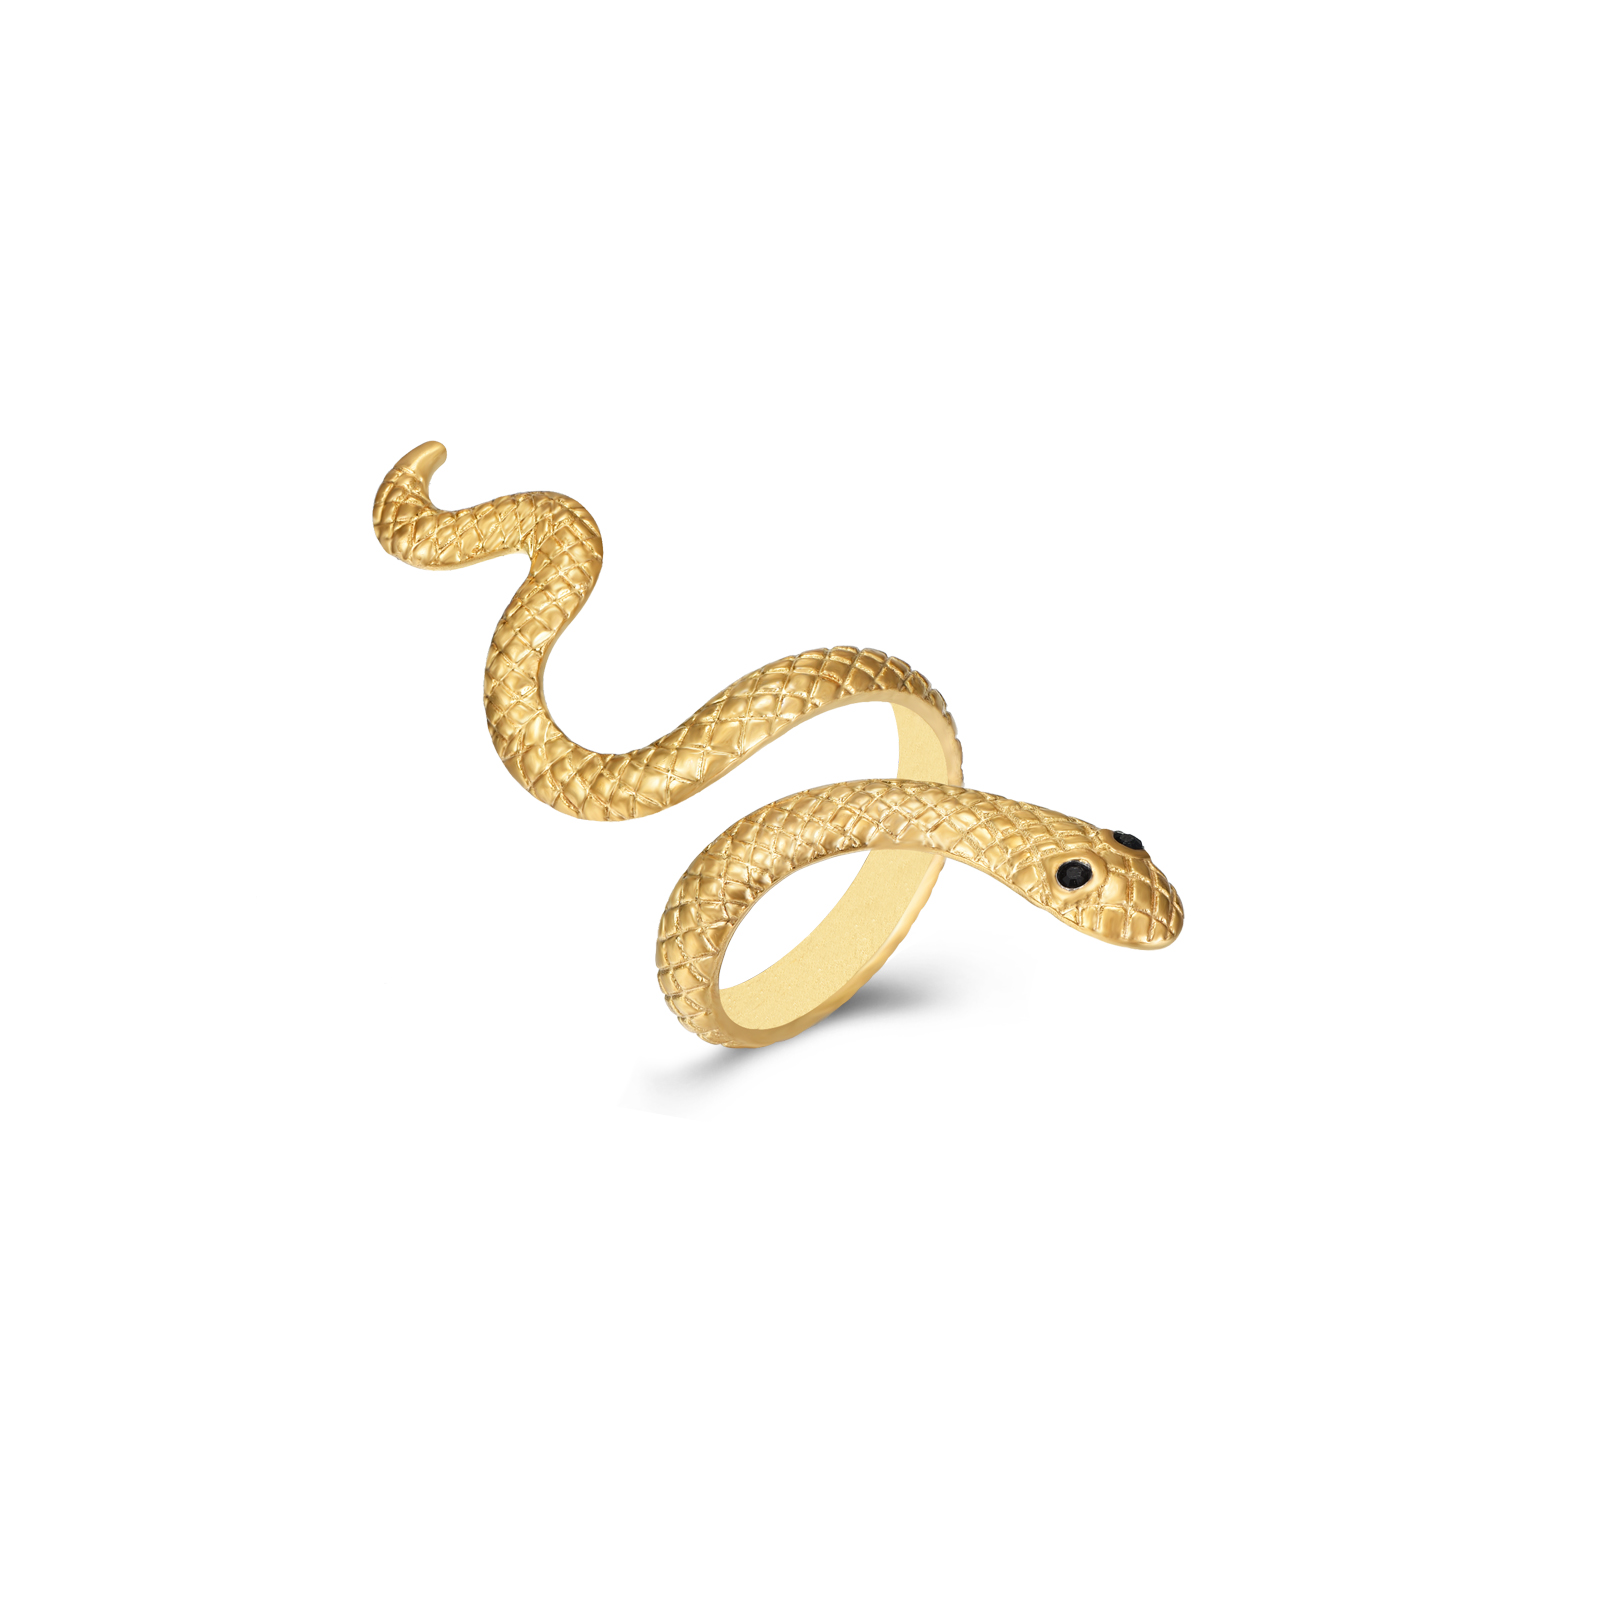 Steel Zirconia Rings Steel Ring - Snake - Black Zirconia - Adjustable from 12 to 16 - Colour Gold